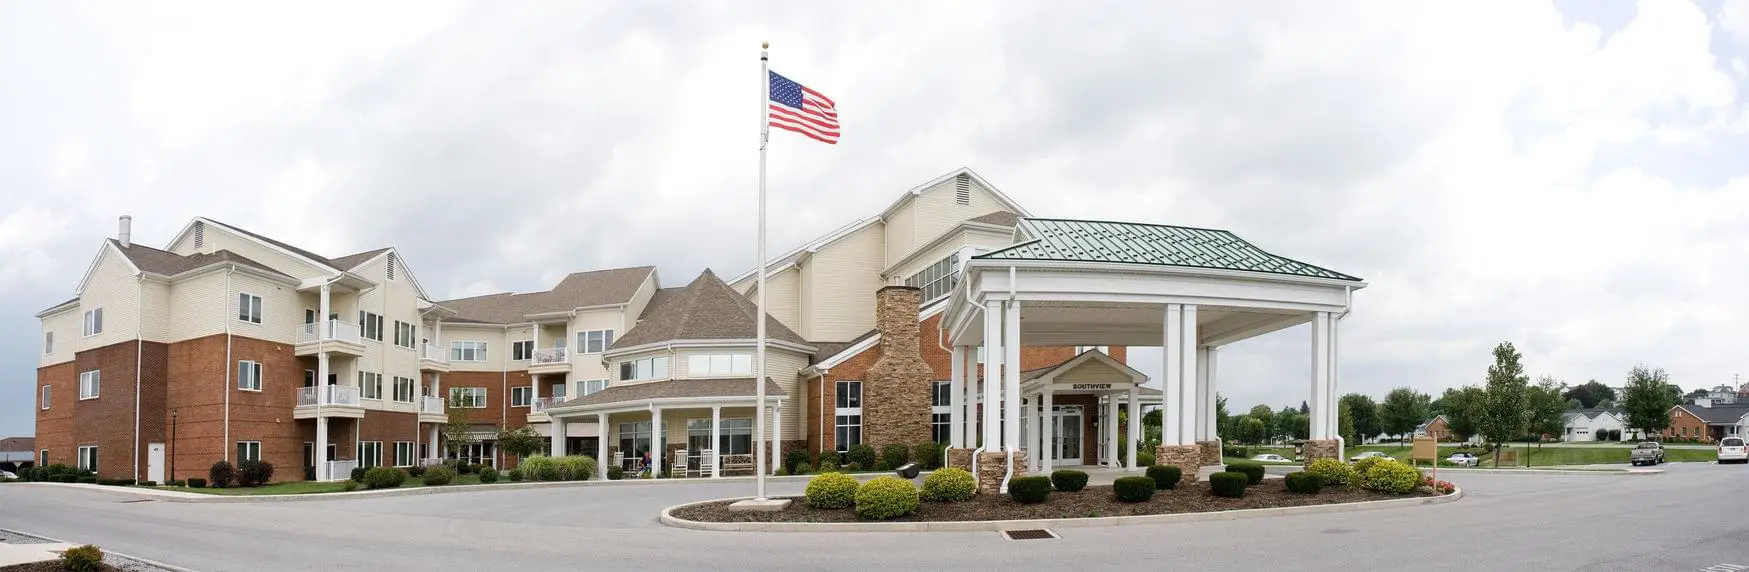 Photo of Homewood at Martinsburg, Assisted Living, Nursing Home, Independent Living, CCRC, Martinsburg, PA 17